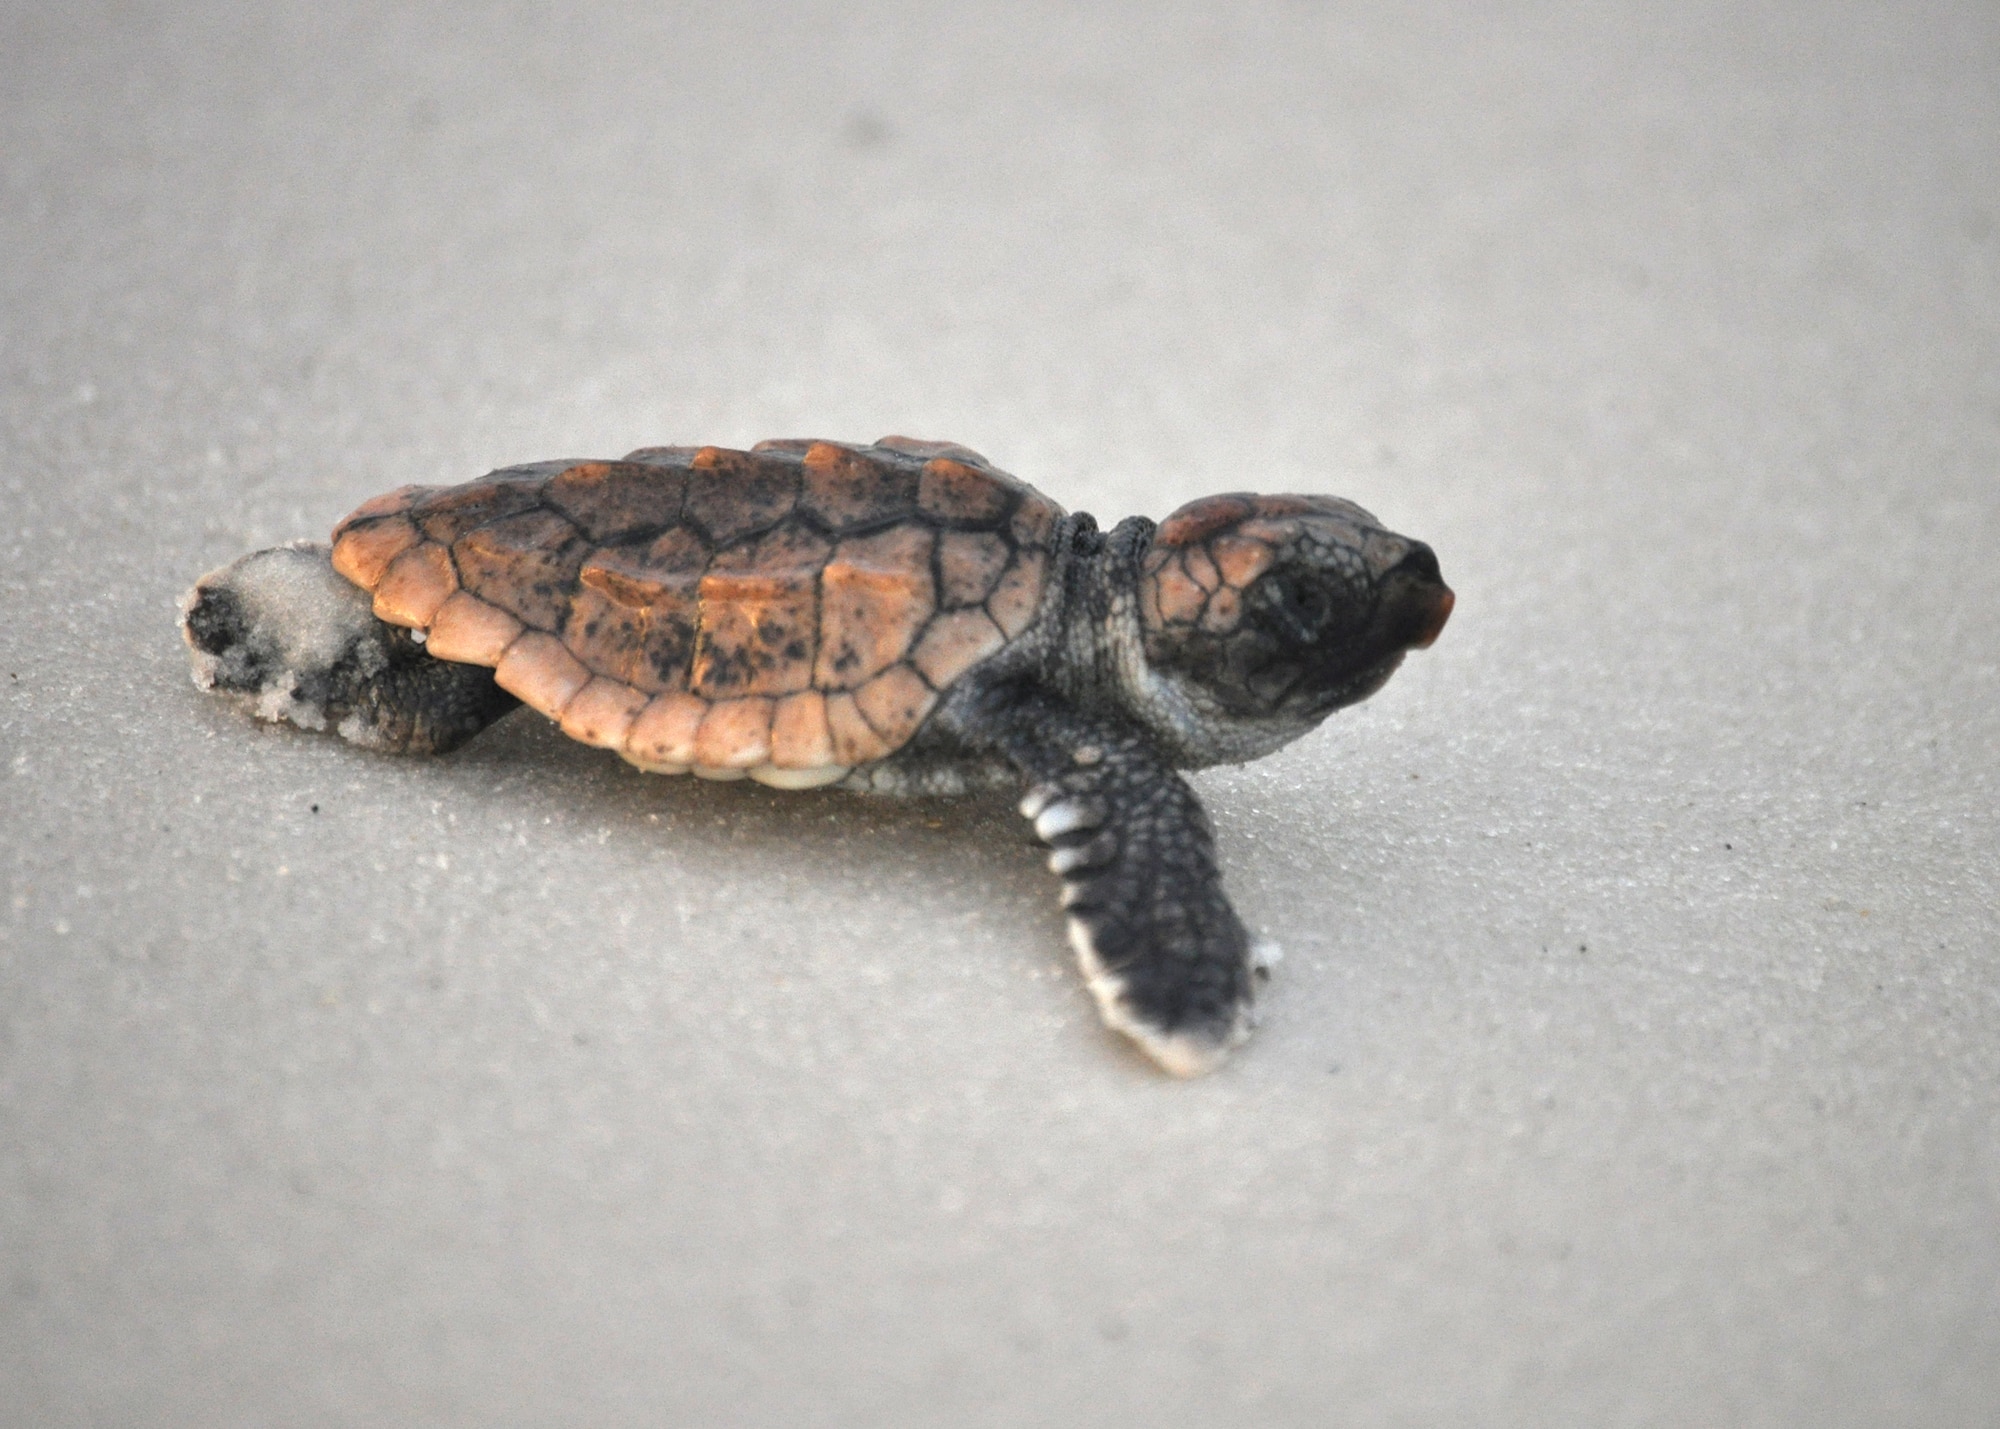 A newly-hatched loggerhead sea turtle crawls to the water after being released by 325th Civil Engineering Squadron Natural Resources surveyors Aug. 23 on Tyndall’s beaches. Natural Resources monitors and protects the sea turtles that come to Tyndall’s beaches to nest. They also compile data for Florida’s monitoring system on these nests including: where the nests are located, what species of turtles laid the nest and how many successfully hatched out of the nest. (U.S. Air Force photo by Airman 1st Class Alex Echols)